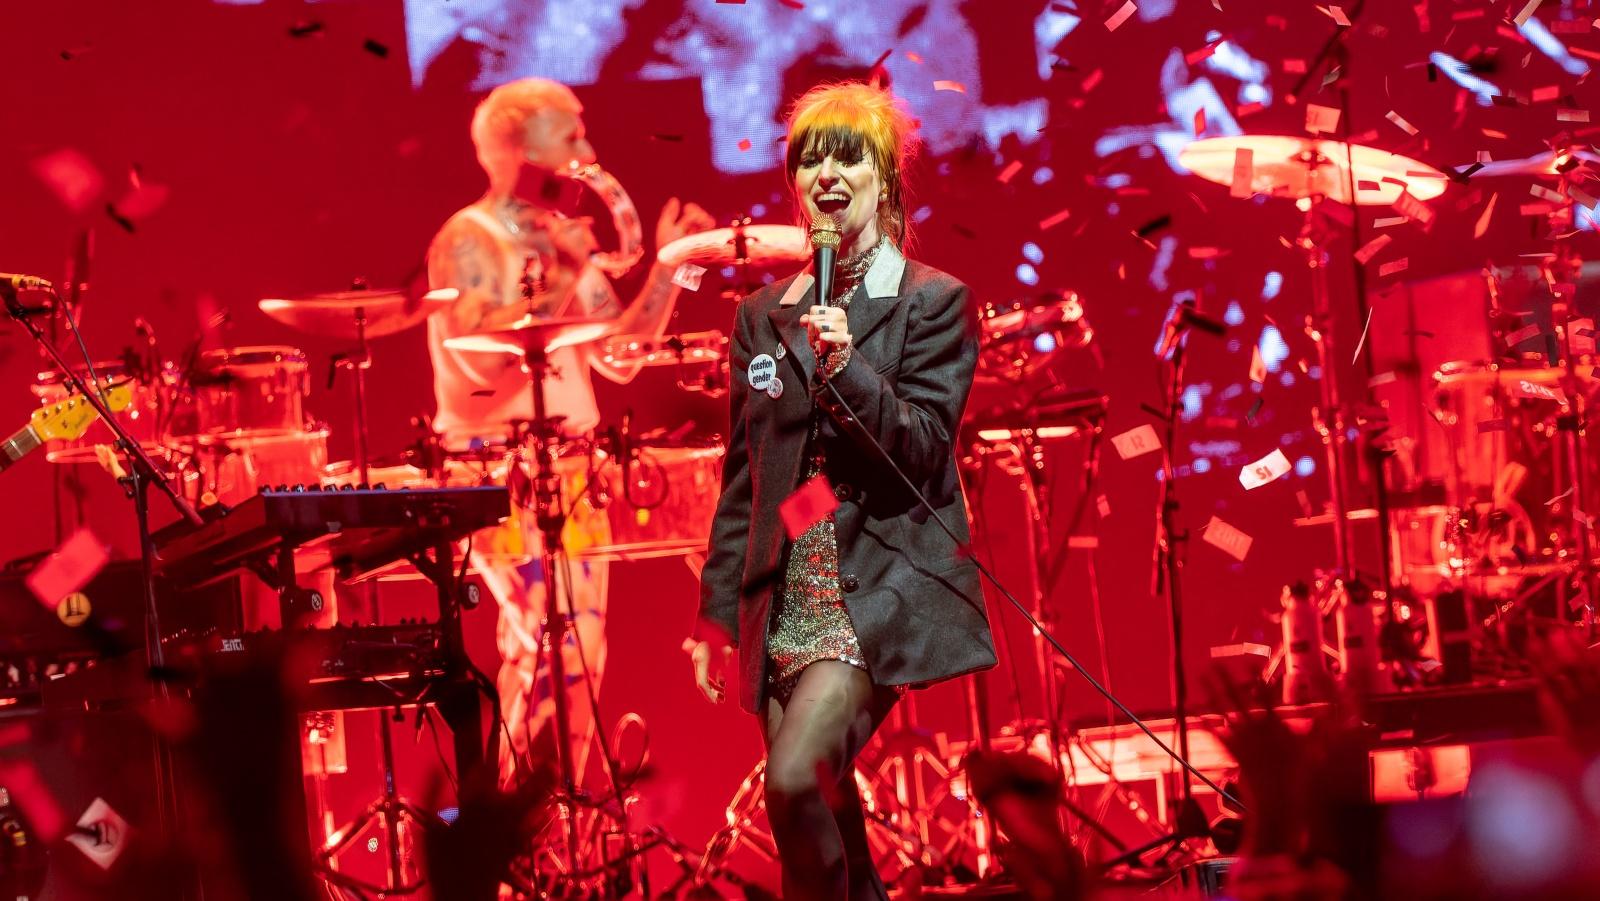 Paramore performs in concert and drowned in confetti